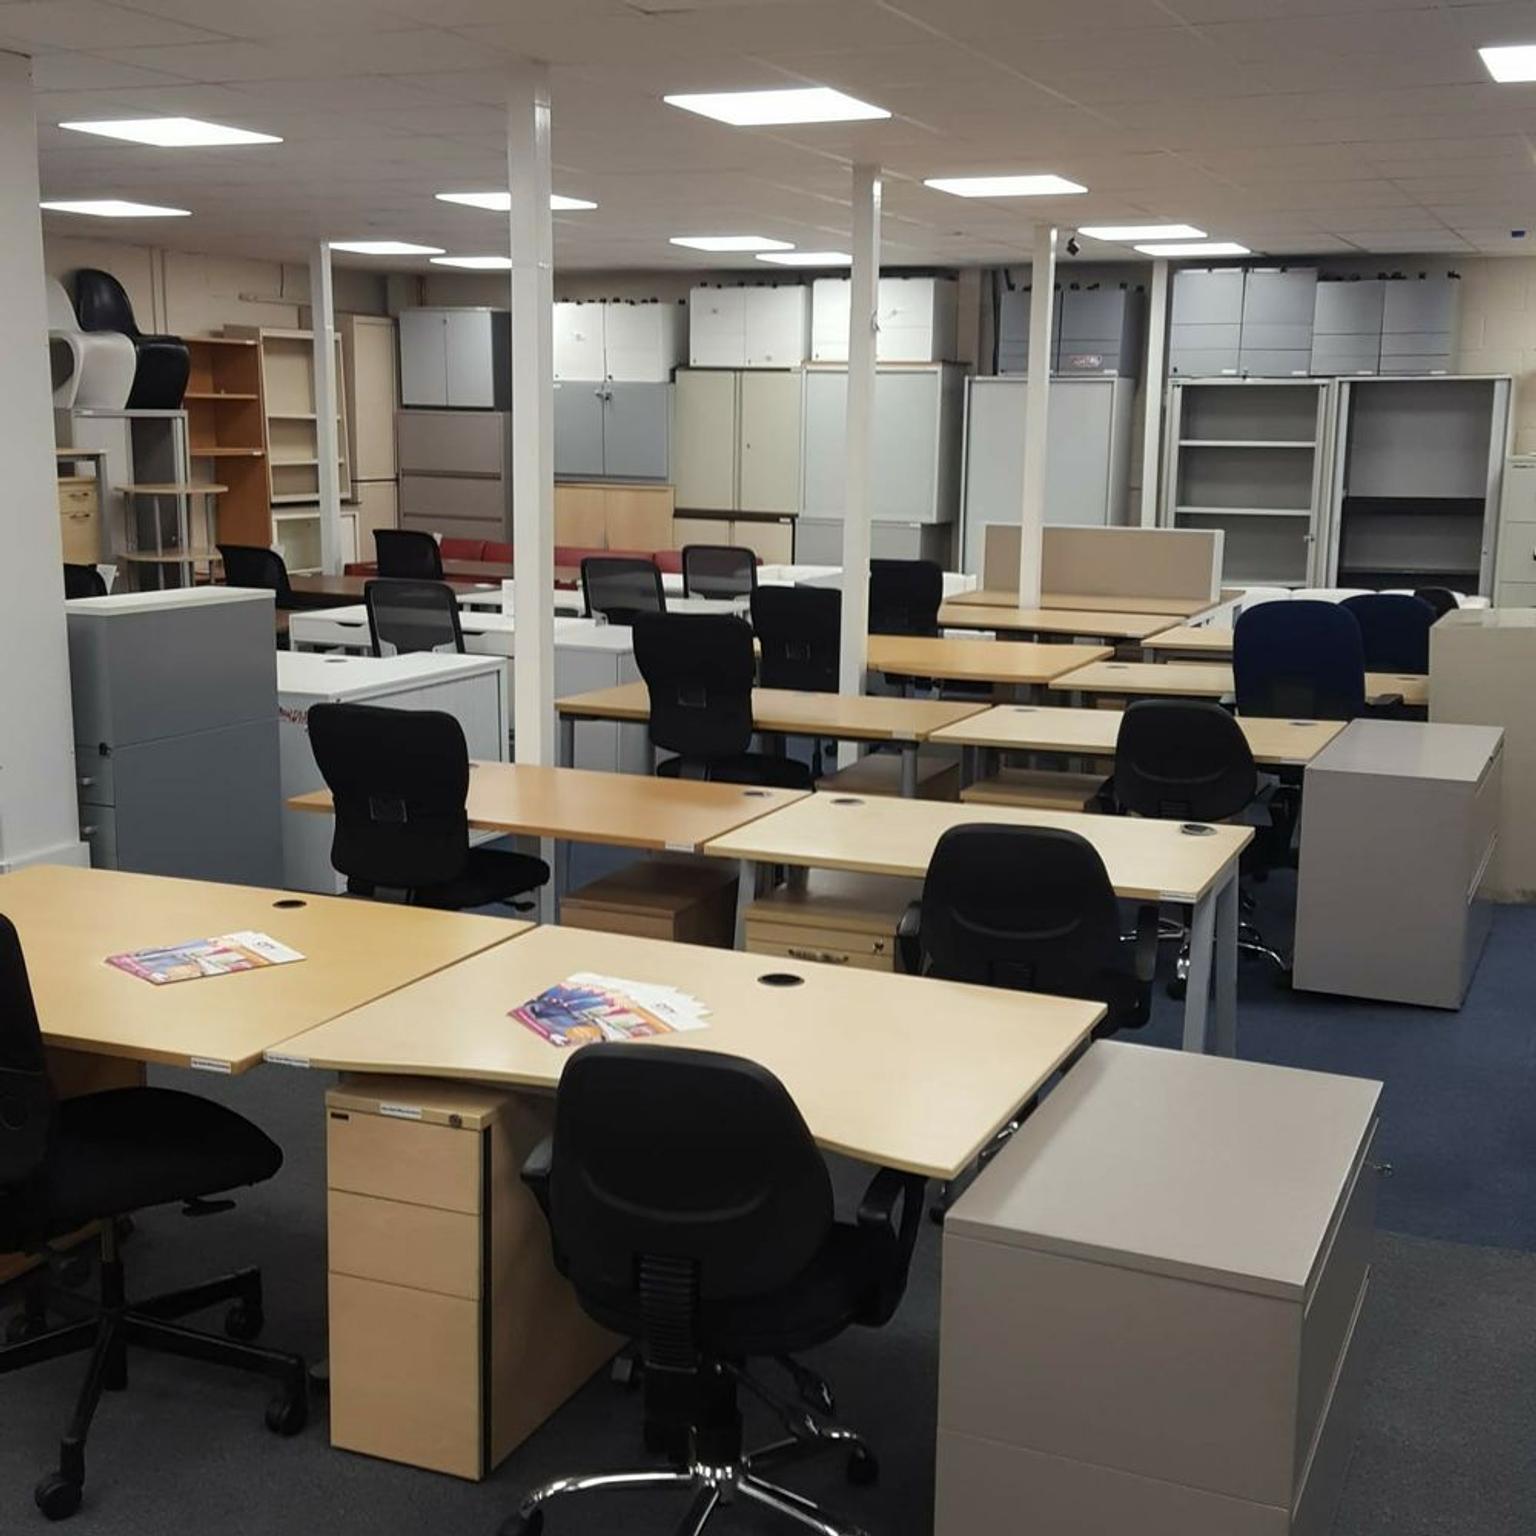 Used Office Furniture Sale Now On In Cm20 Harlow Fur 25 00 Zum